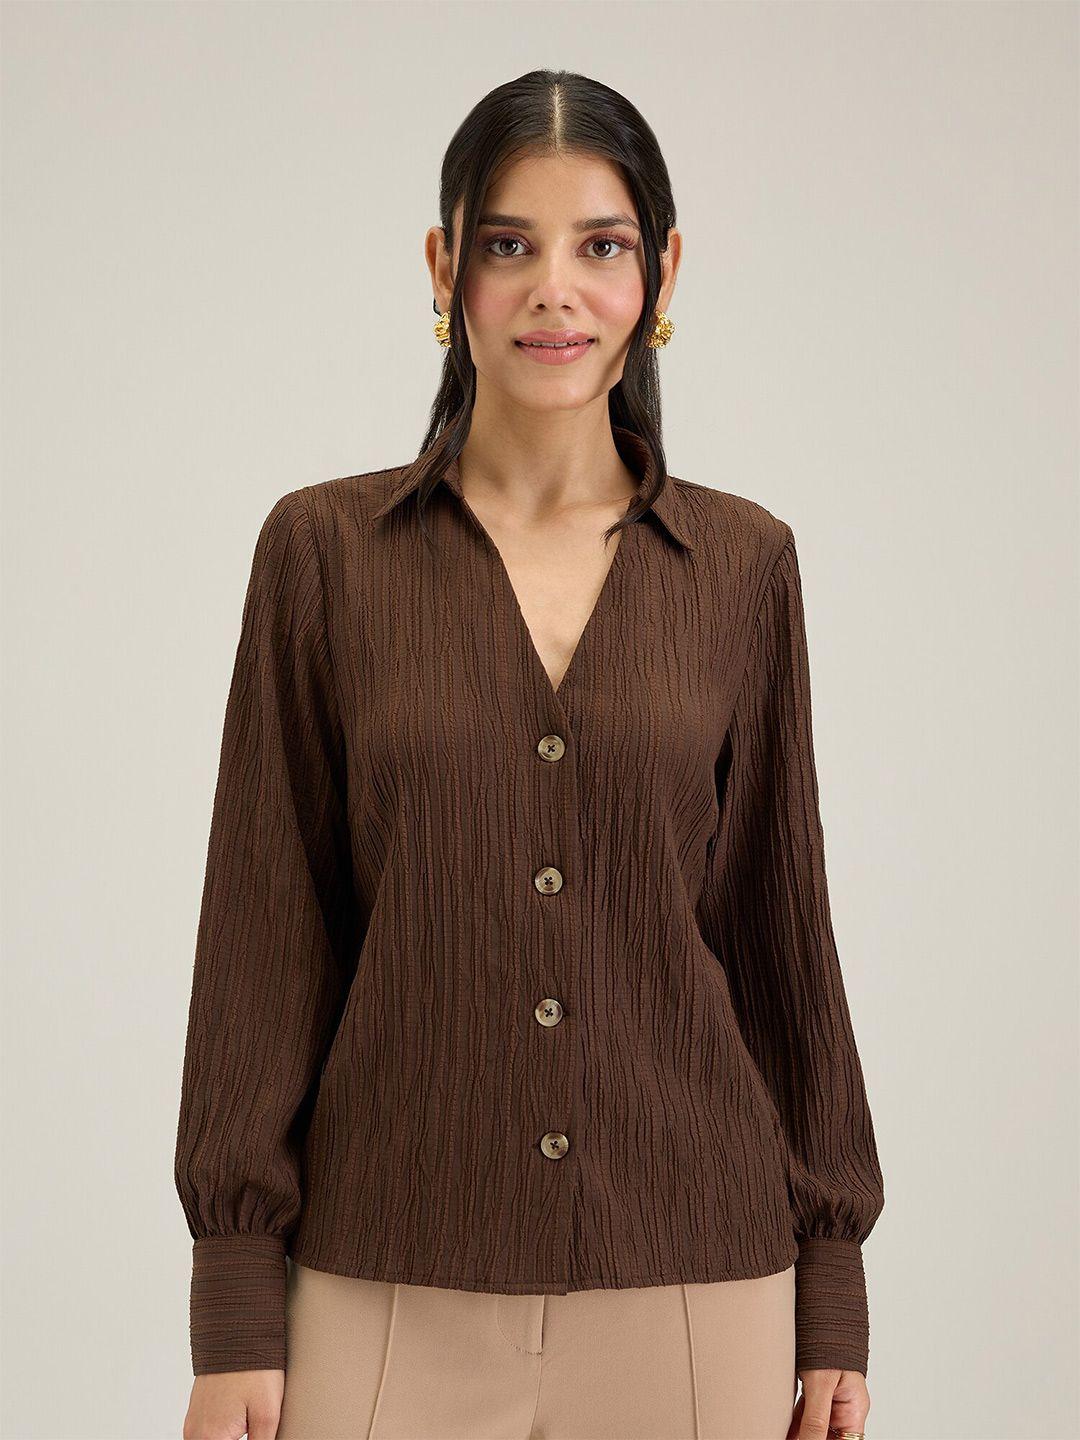 20dresses brown striped shirt style top